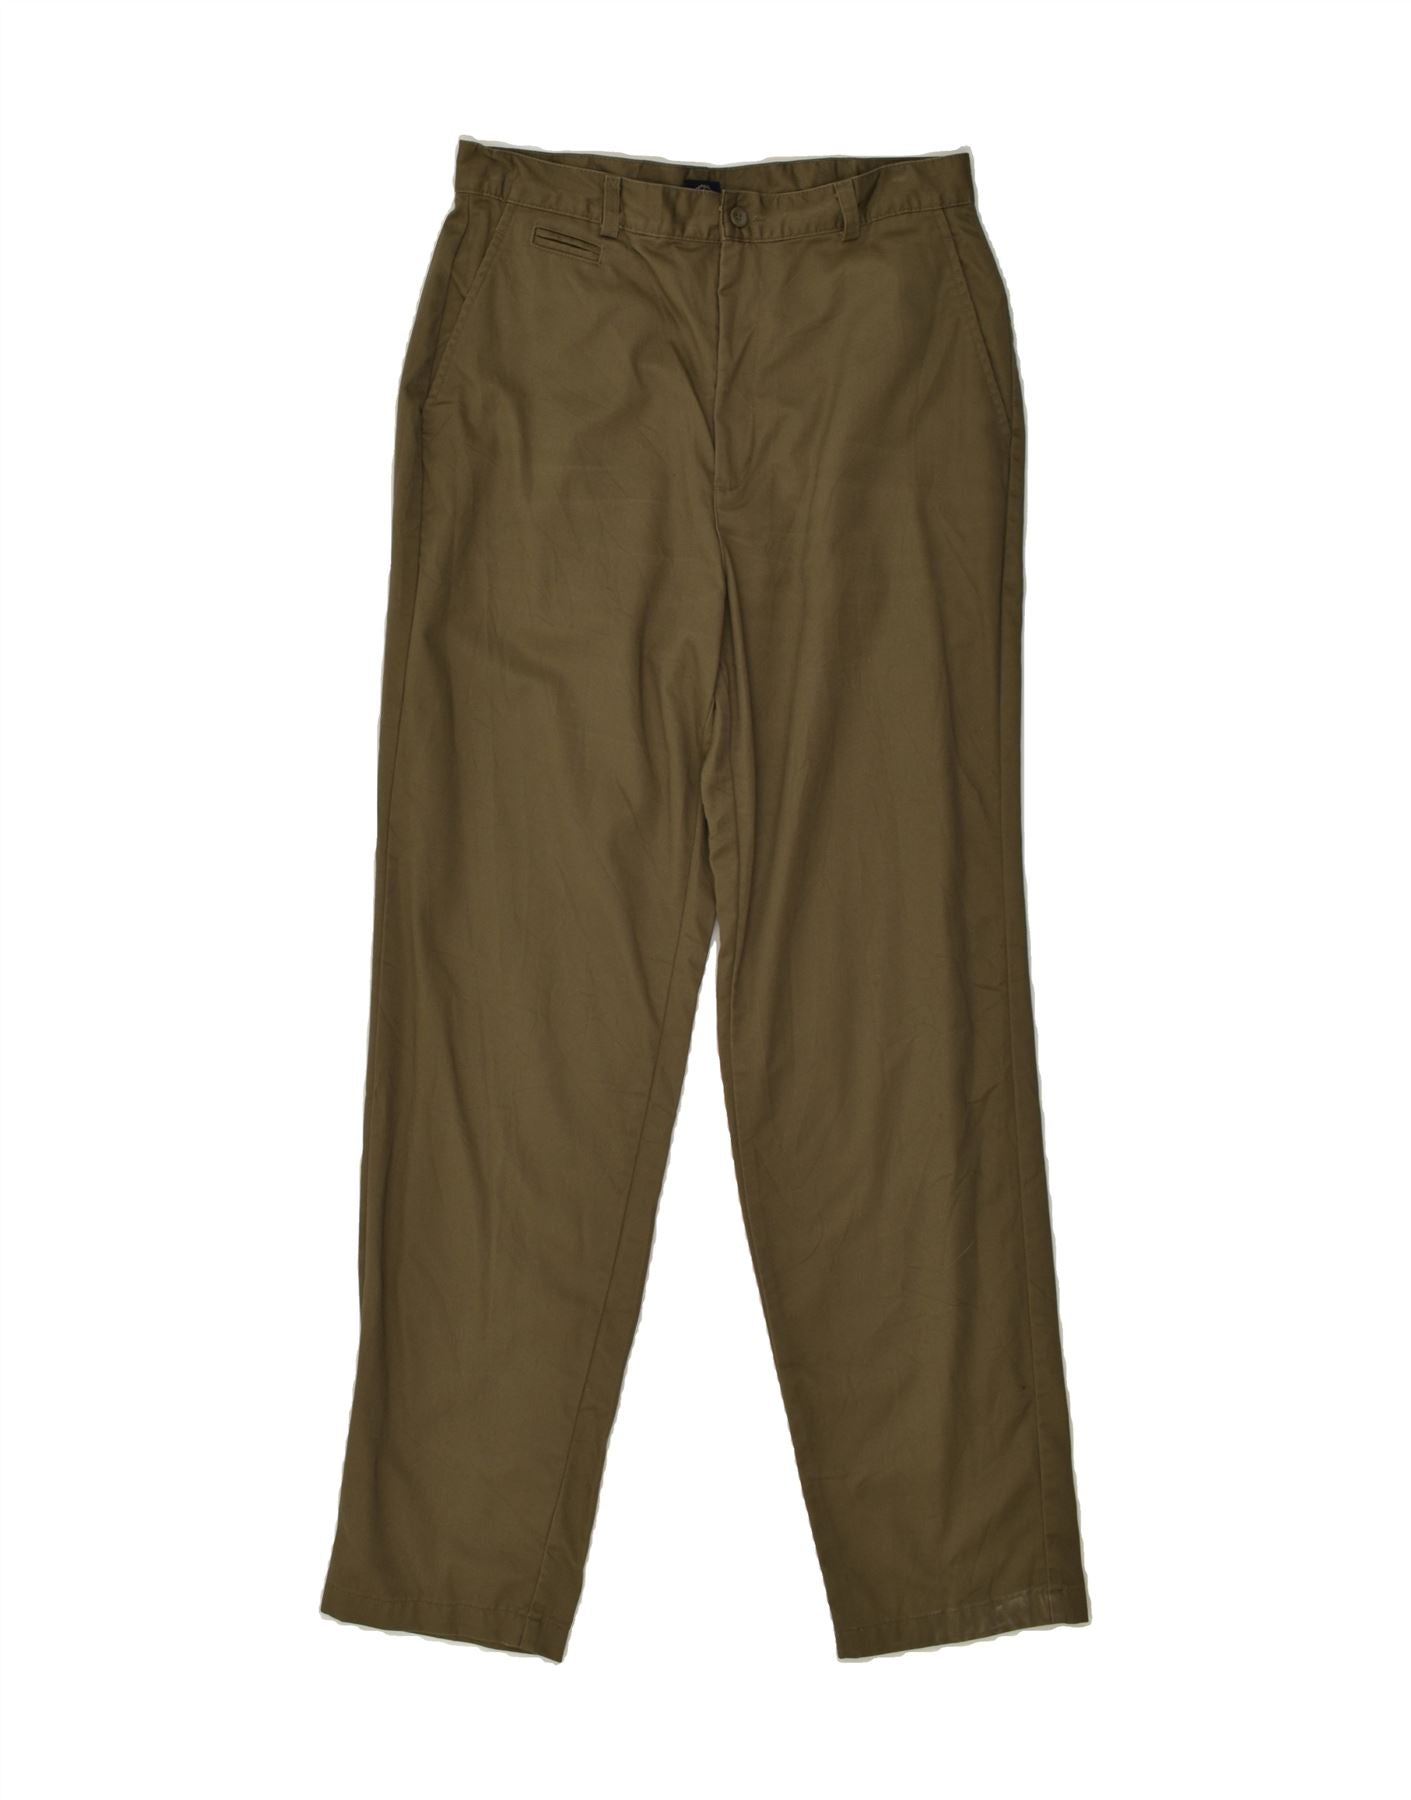 Dockers D2 Stretch Signature Khaki Slim Fit Permanent Crease Flat Front •  Rocky Mountain Connection · Clothing · Gear